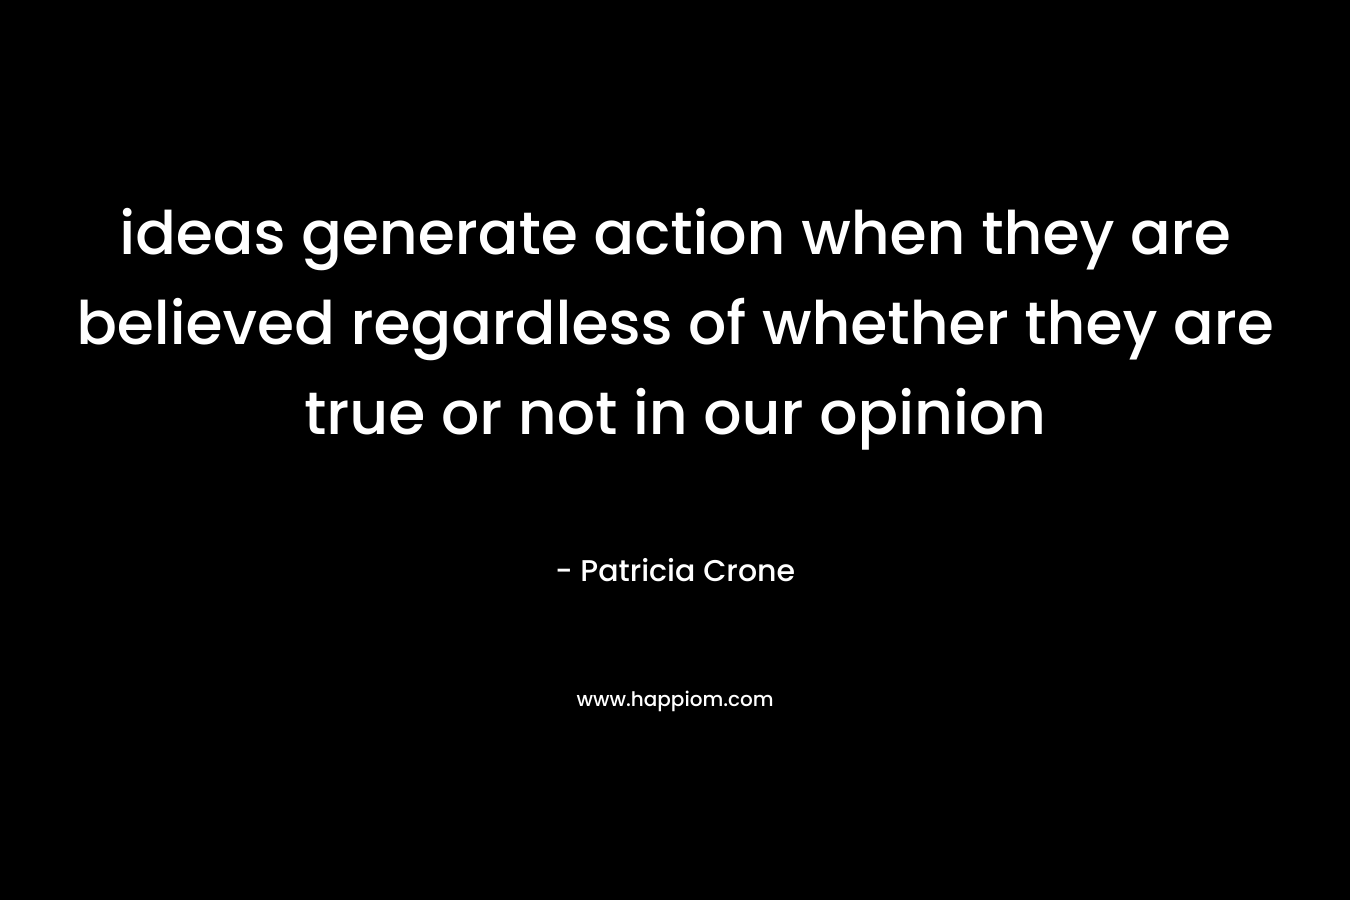 ideas generate action when they are believed regardless of whether they are true or not in our opinion